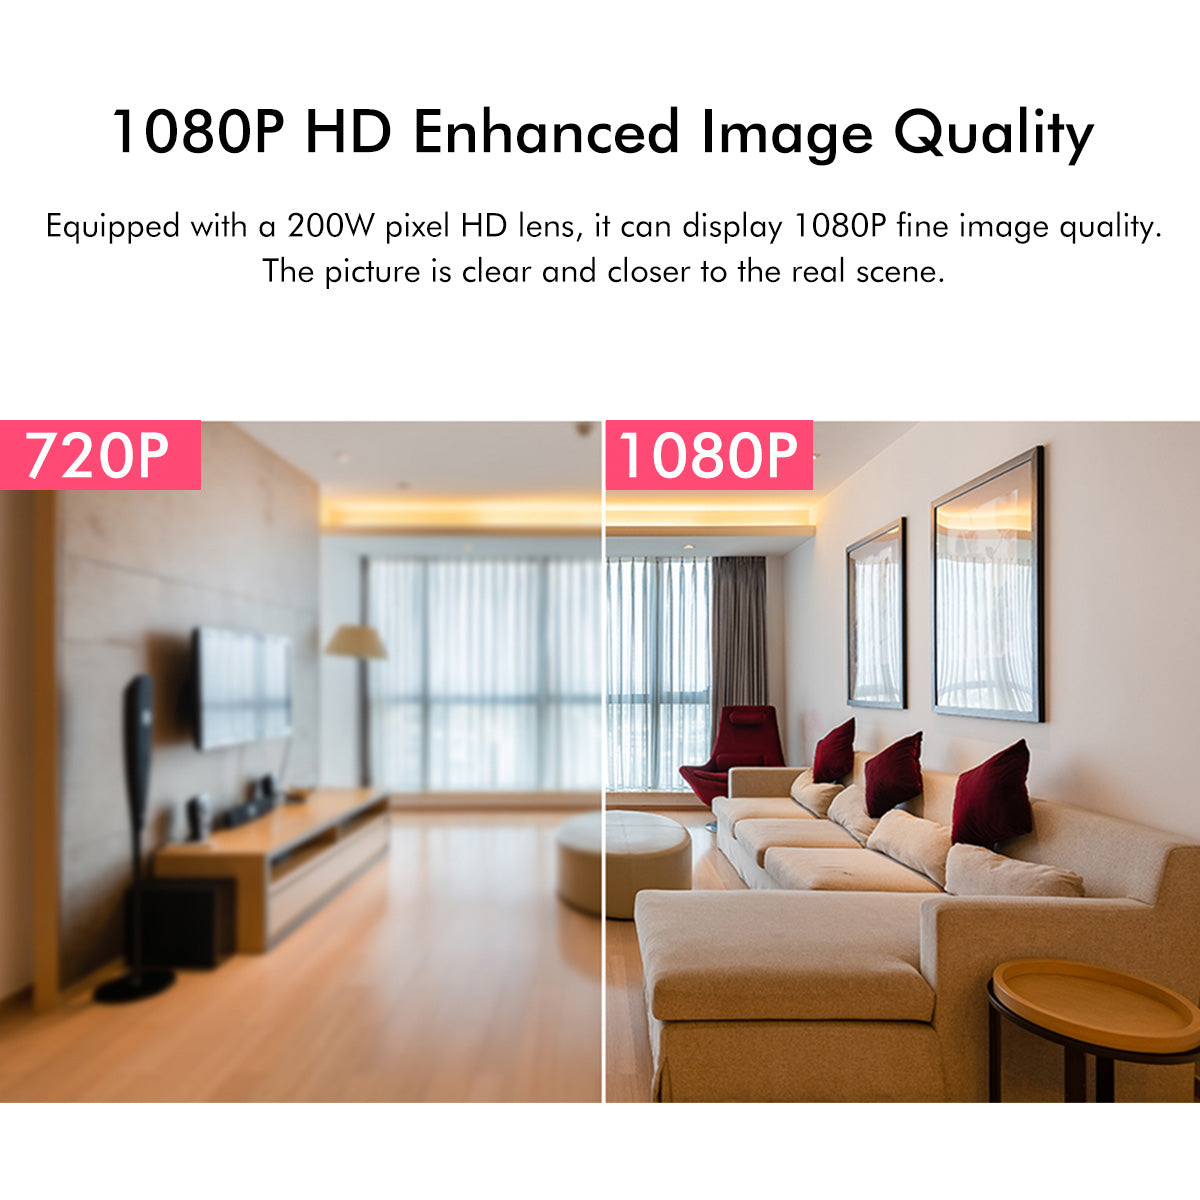 New 1080P HD Wireless 360° Panorama IP Camera Intelligent Auto Tracking Home Security Surveillance CCTV Network Wifi Cameras Infrared Night Vision